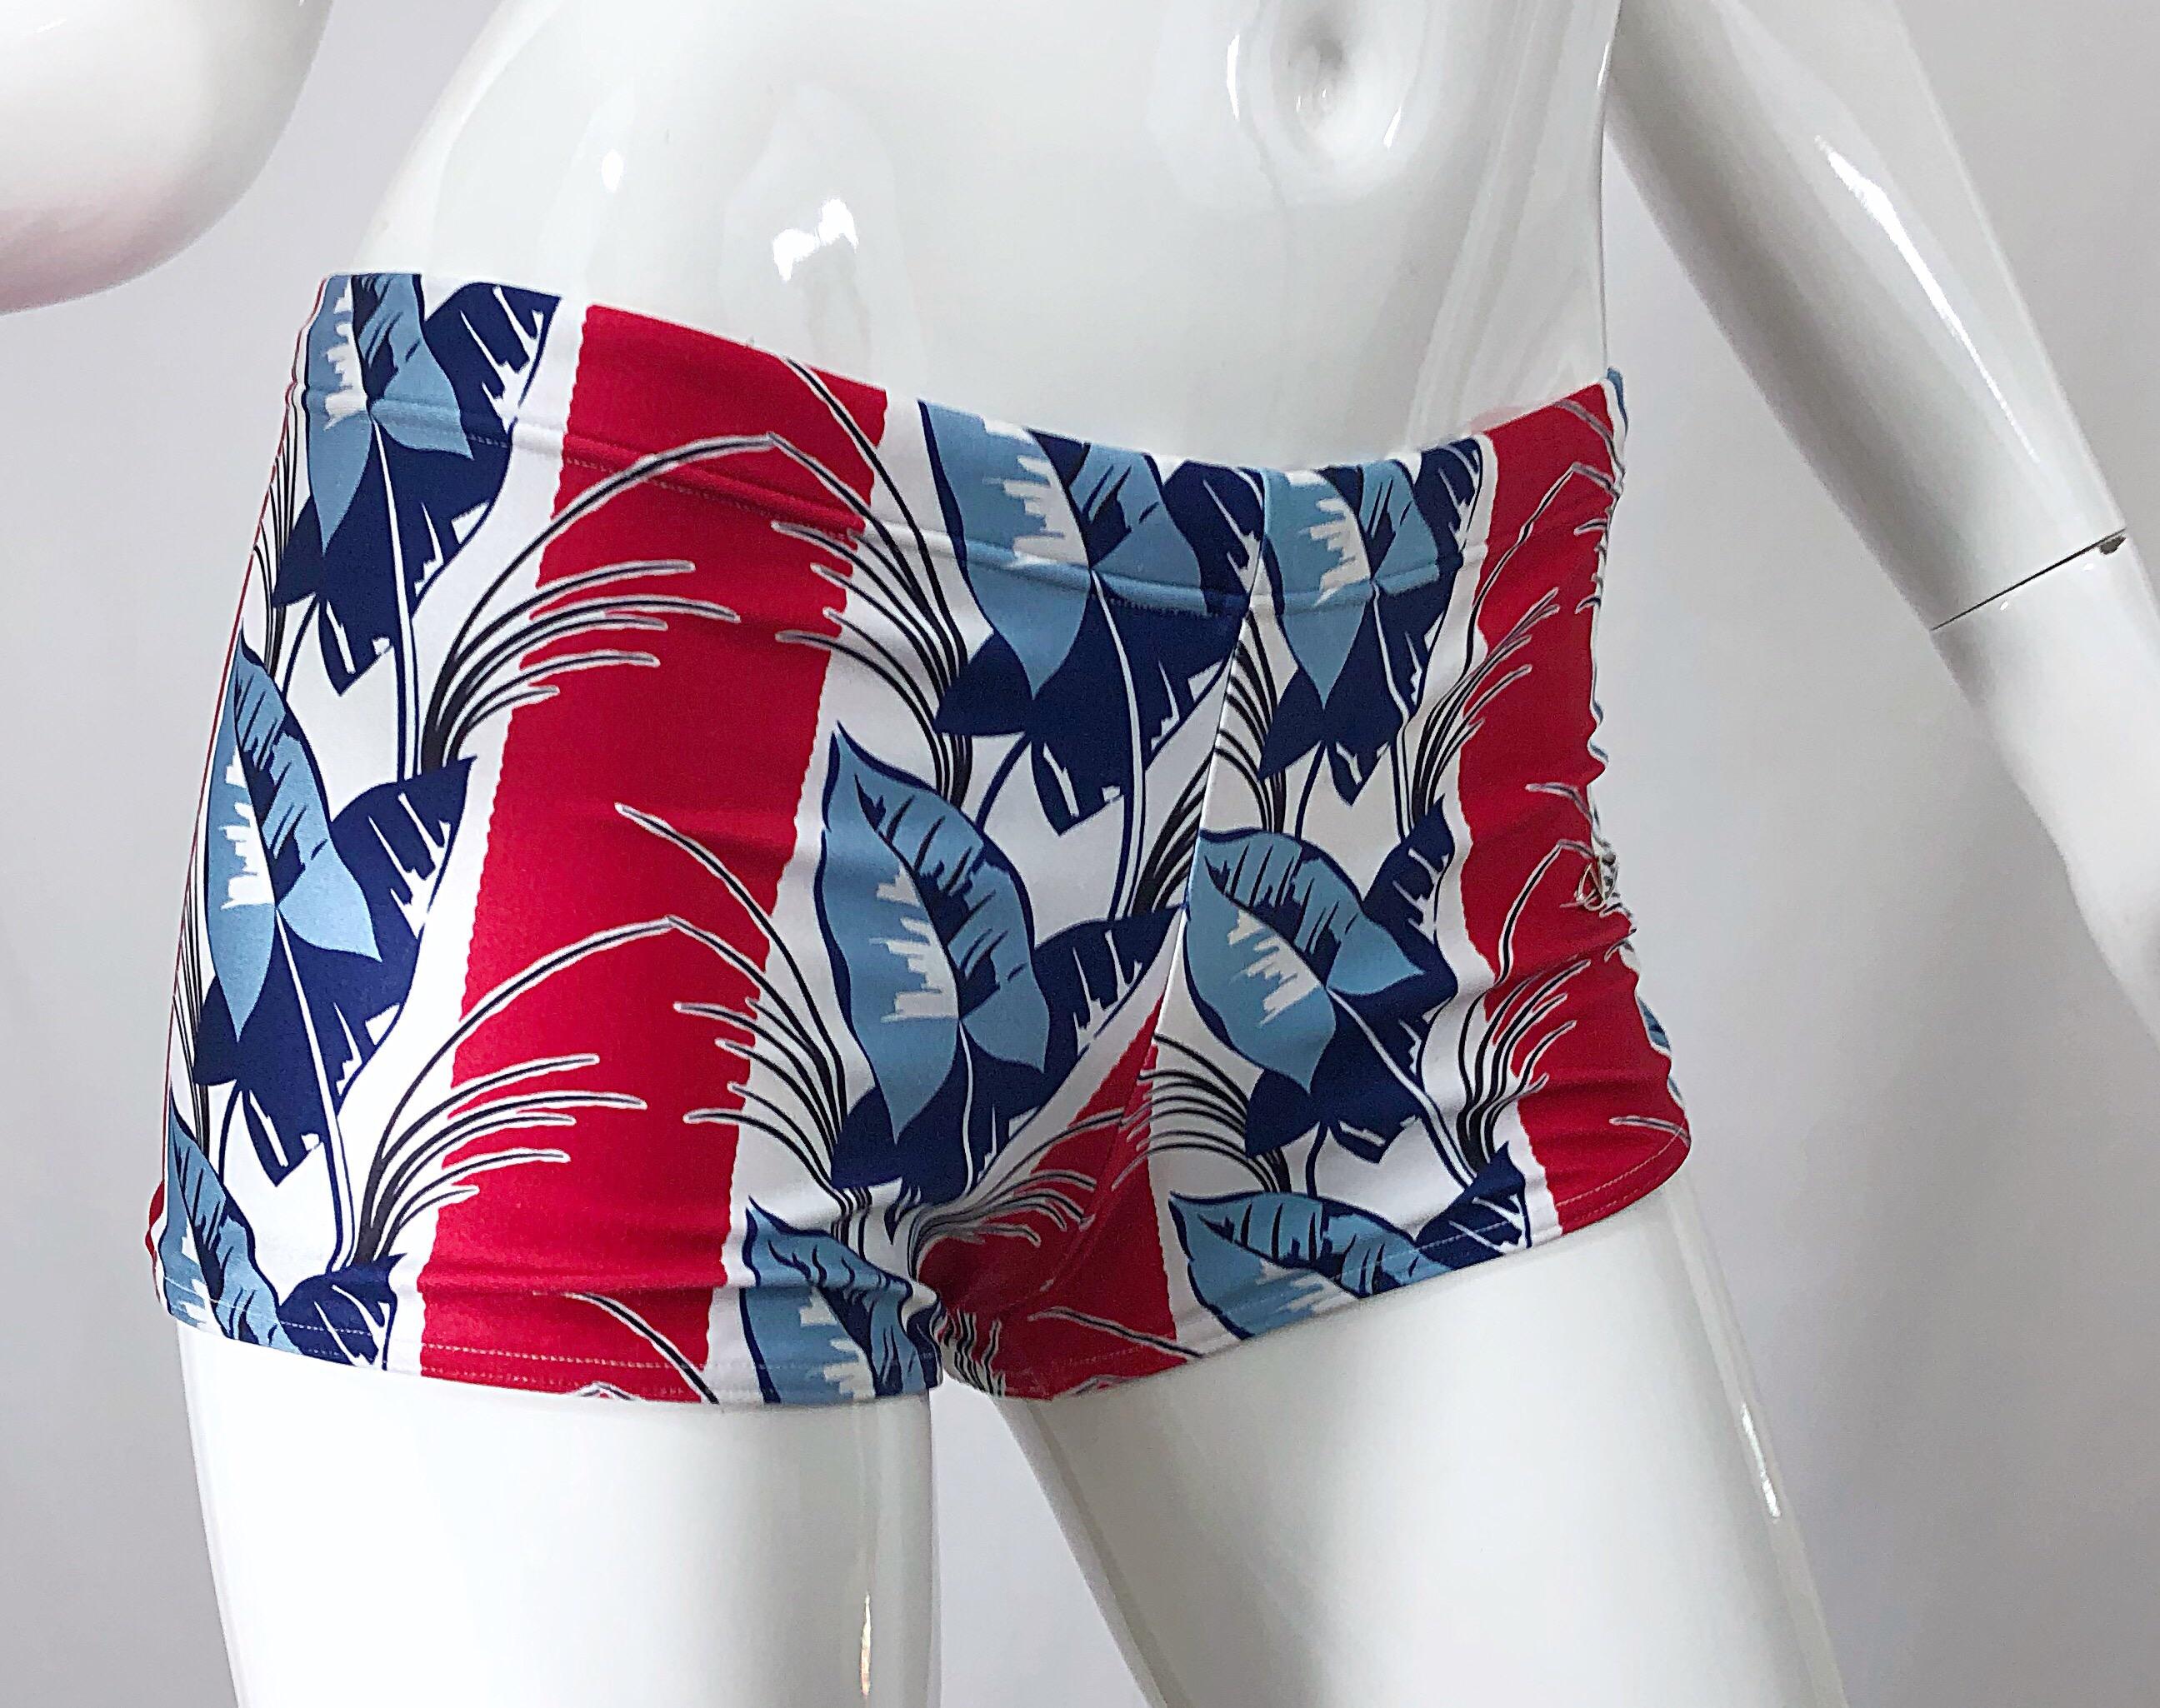 Valentino New 2000s Women's Red, White and Blue Boy Shorts Swimsuit Bottoms In Excellent Condition For Sale In San Diego, CA